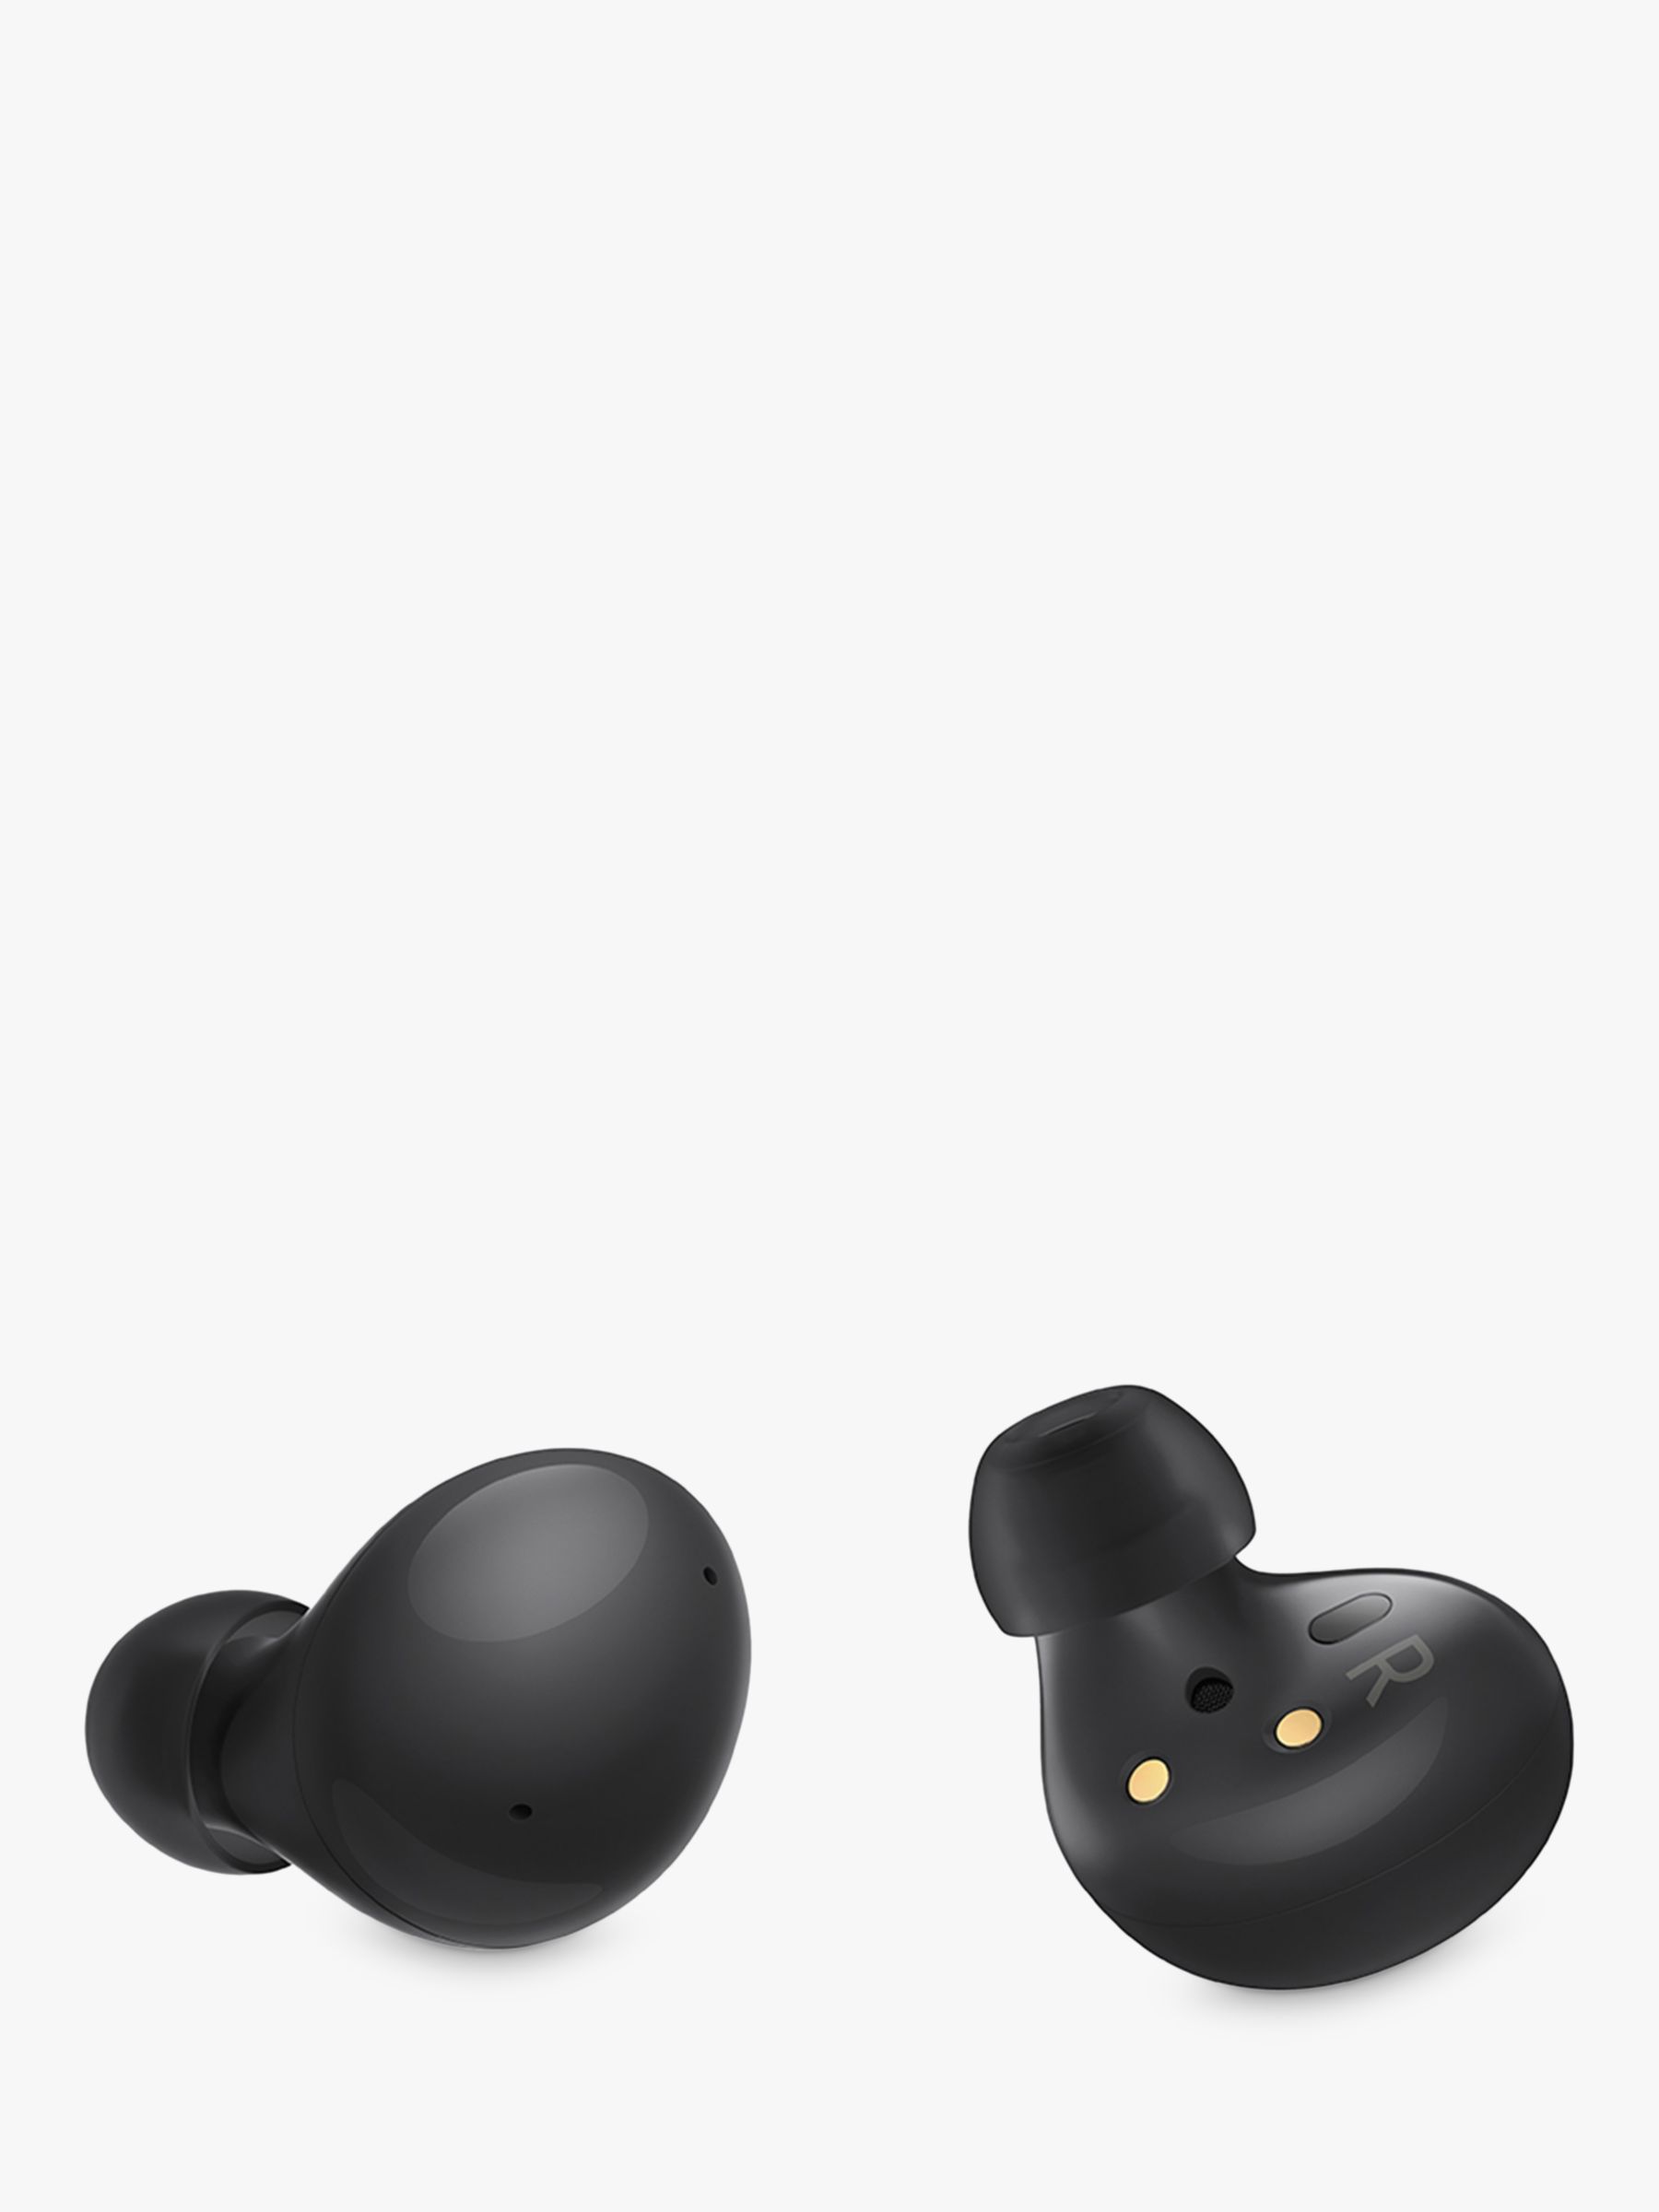 Samsung Galaxy Buds2 True Wireless Earbuds with Active Noise Cancellation, Graphite